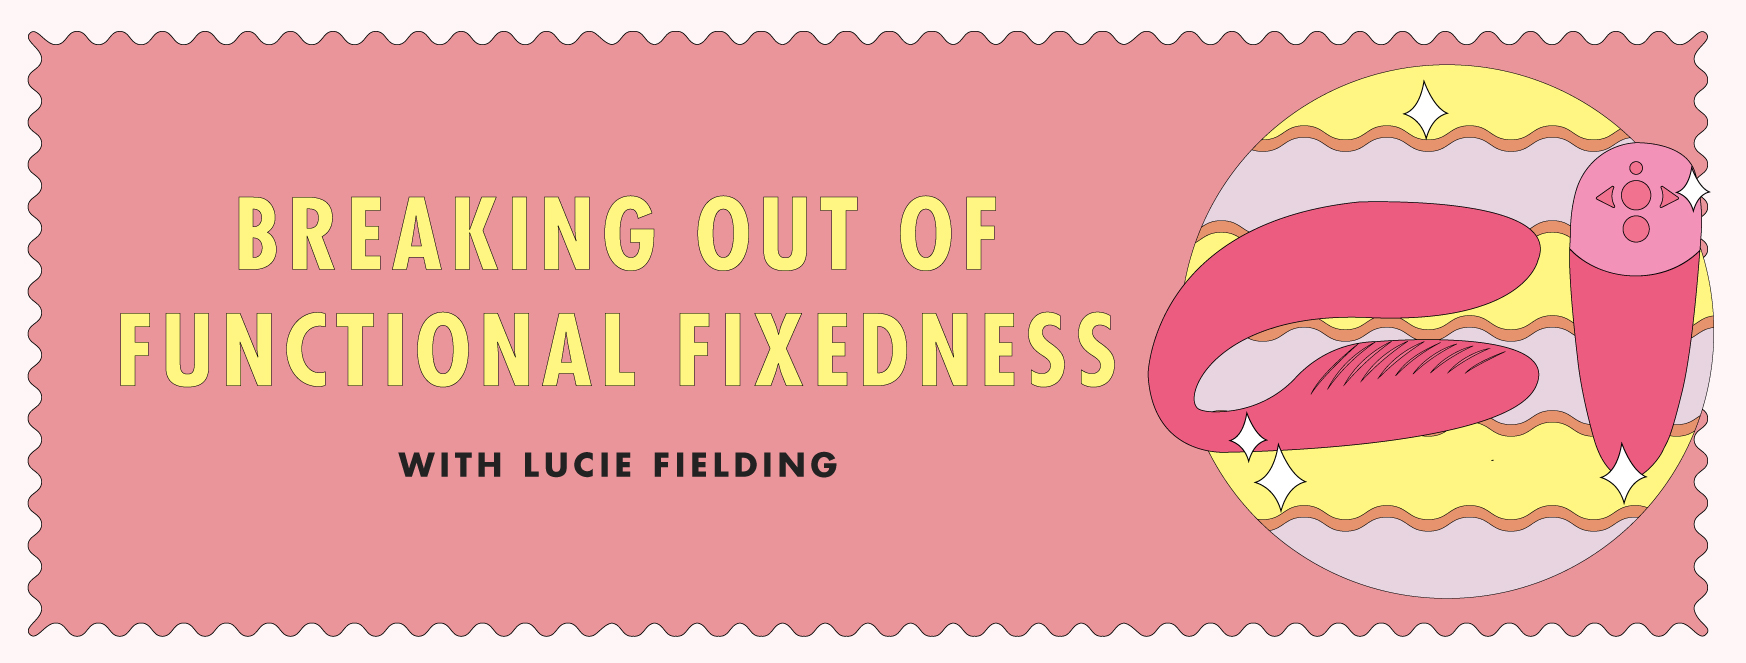 Breaking Out of Functional Fixedness